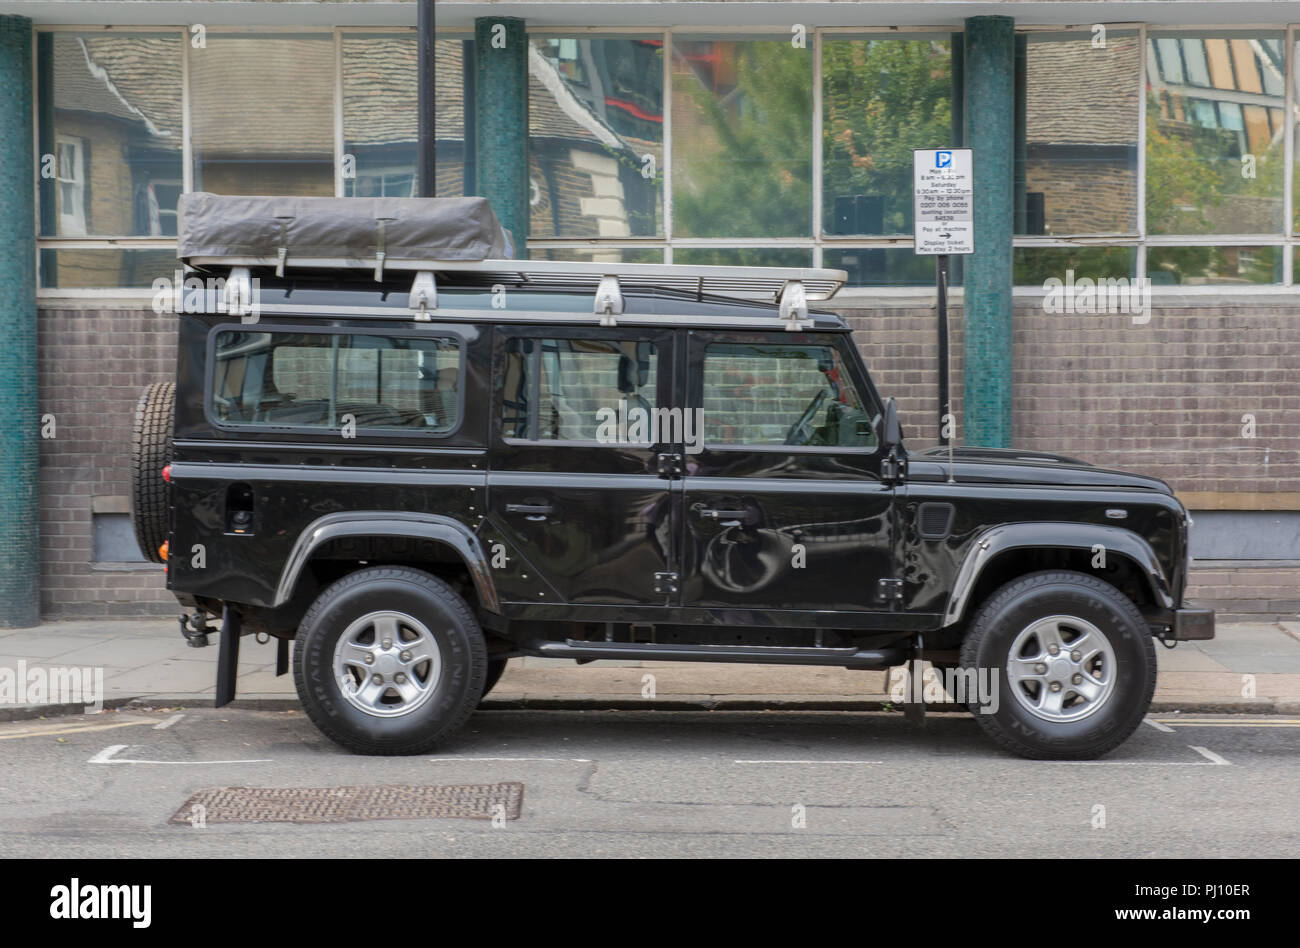 a land rover 110 defender county station wagon four wheel drive off road vehicle with an expedition roof rack. Stock Photo